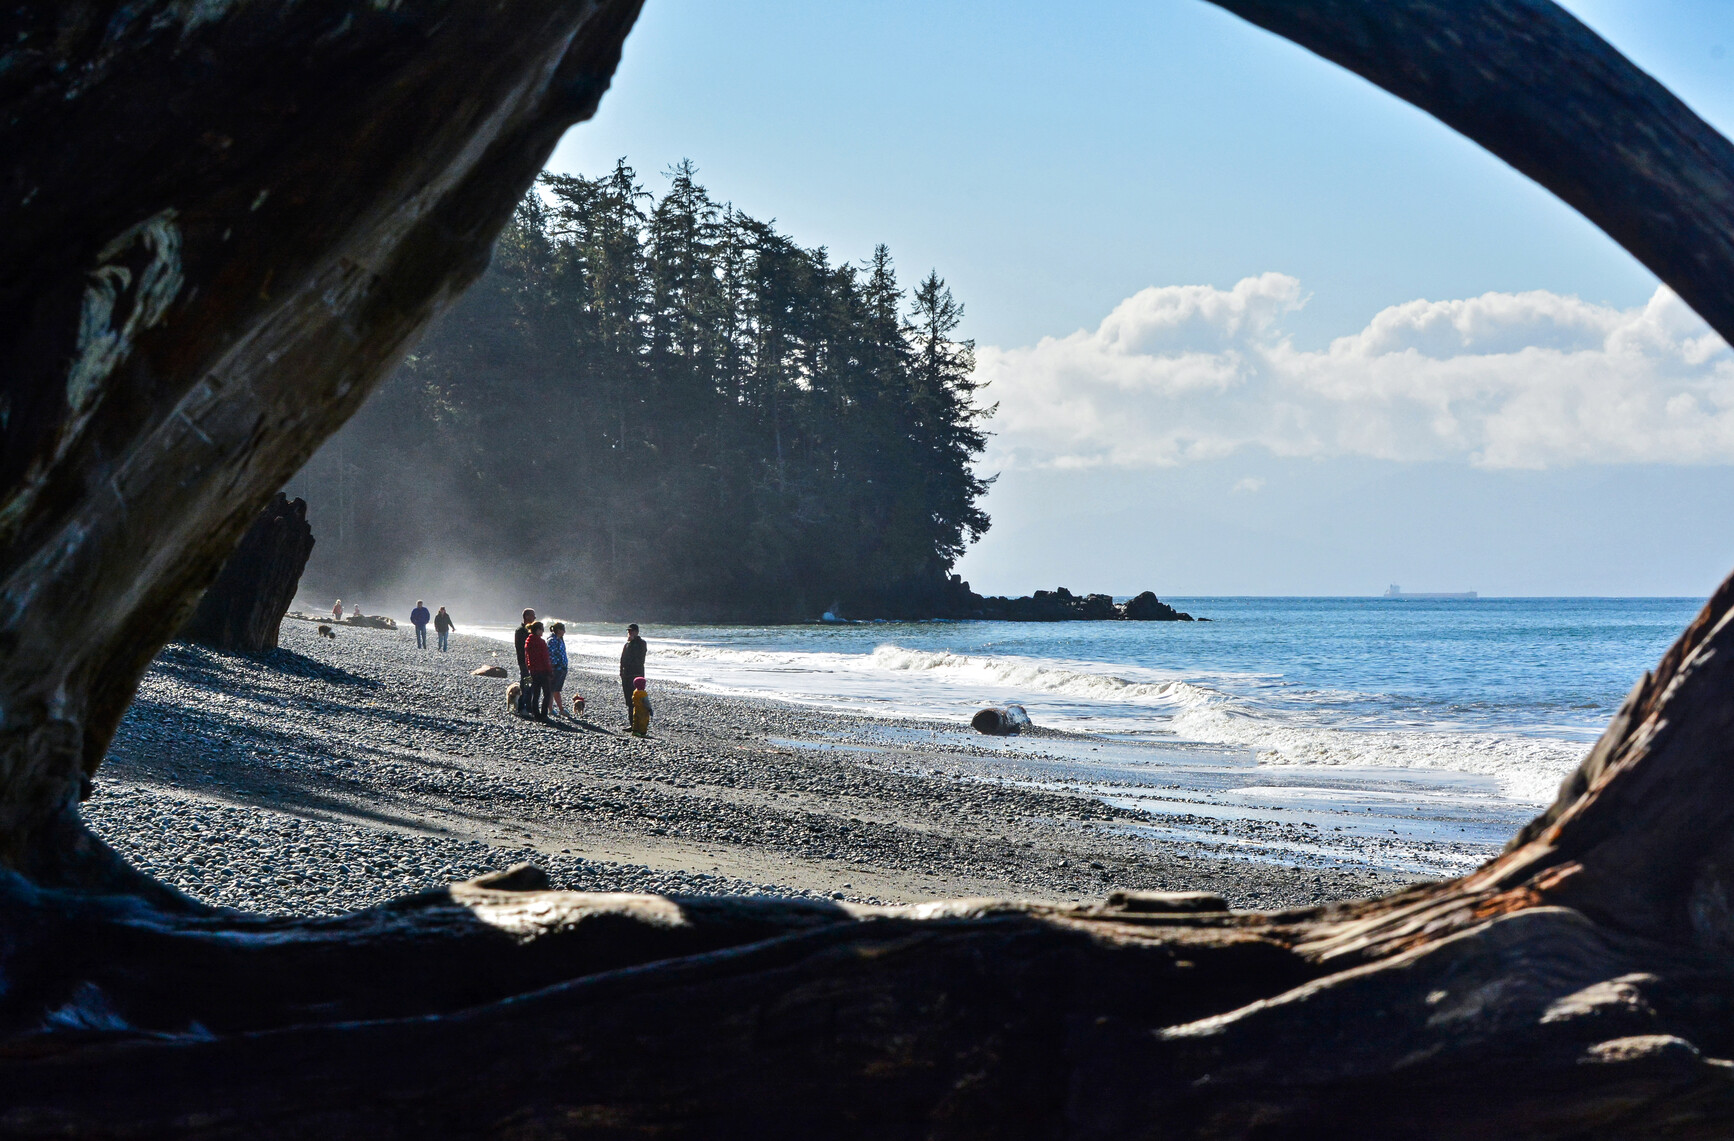 Beach view through log branches. Visitors on beach. Forest in background. Mountain range can be seen across the strait.